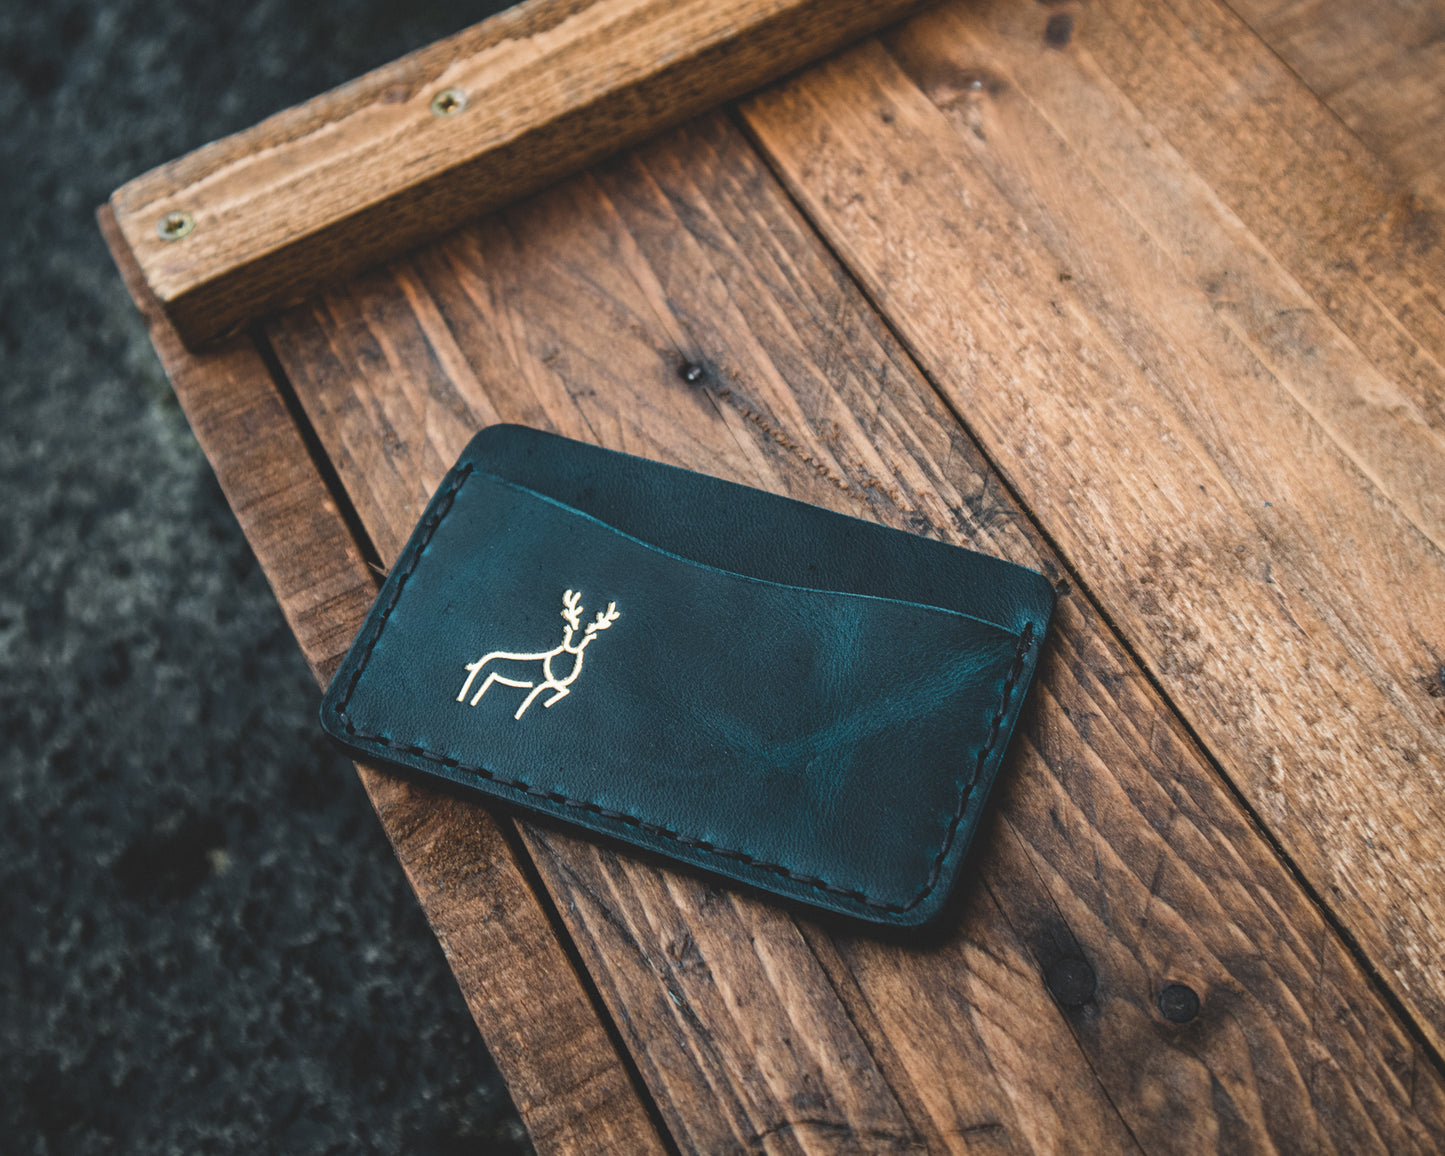 The Highland Leather Wallet